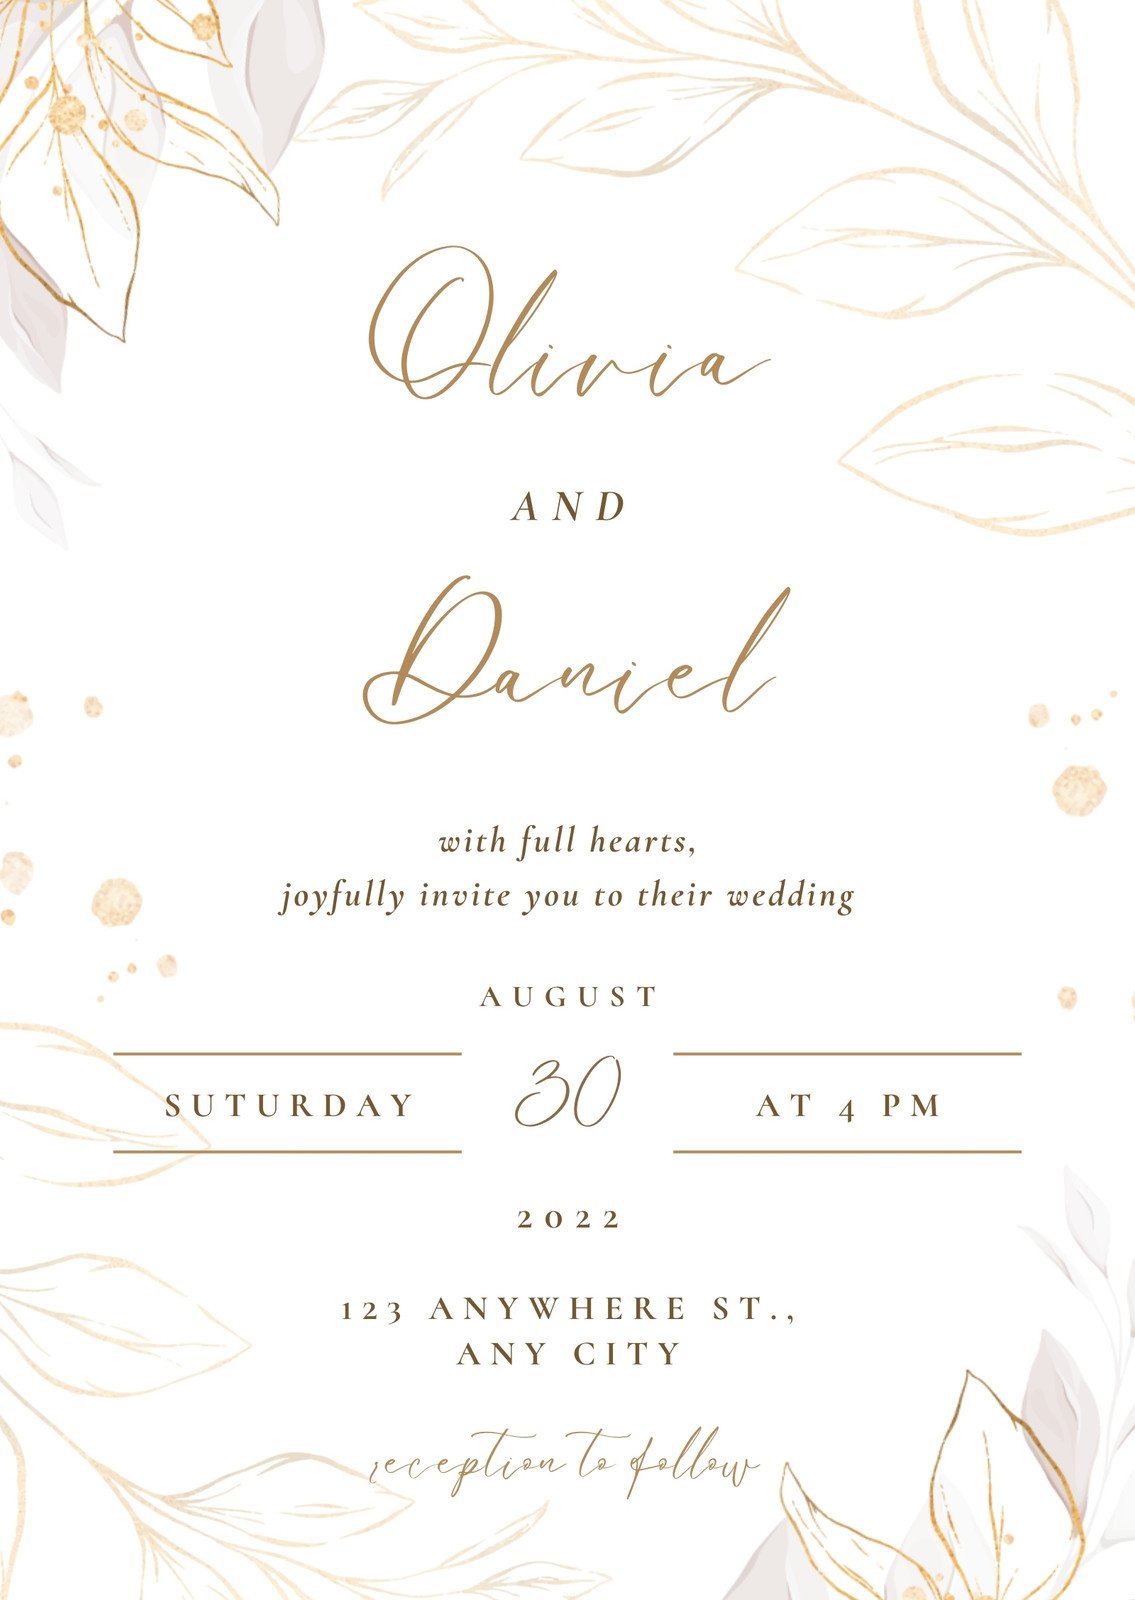 wedding invitation templates to customize for free | canva